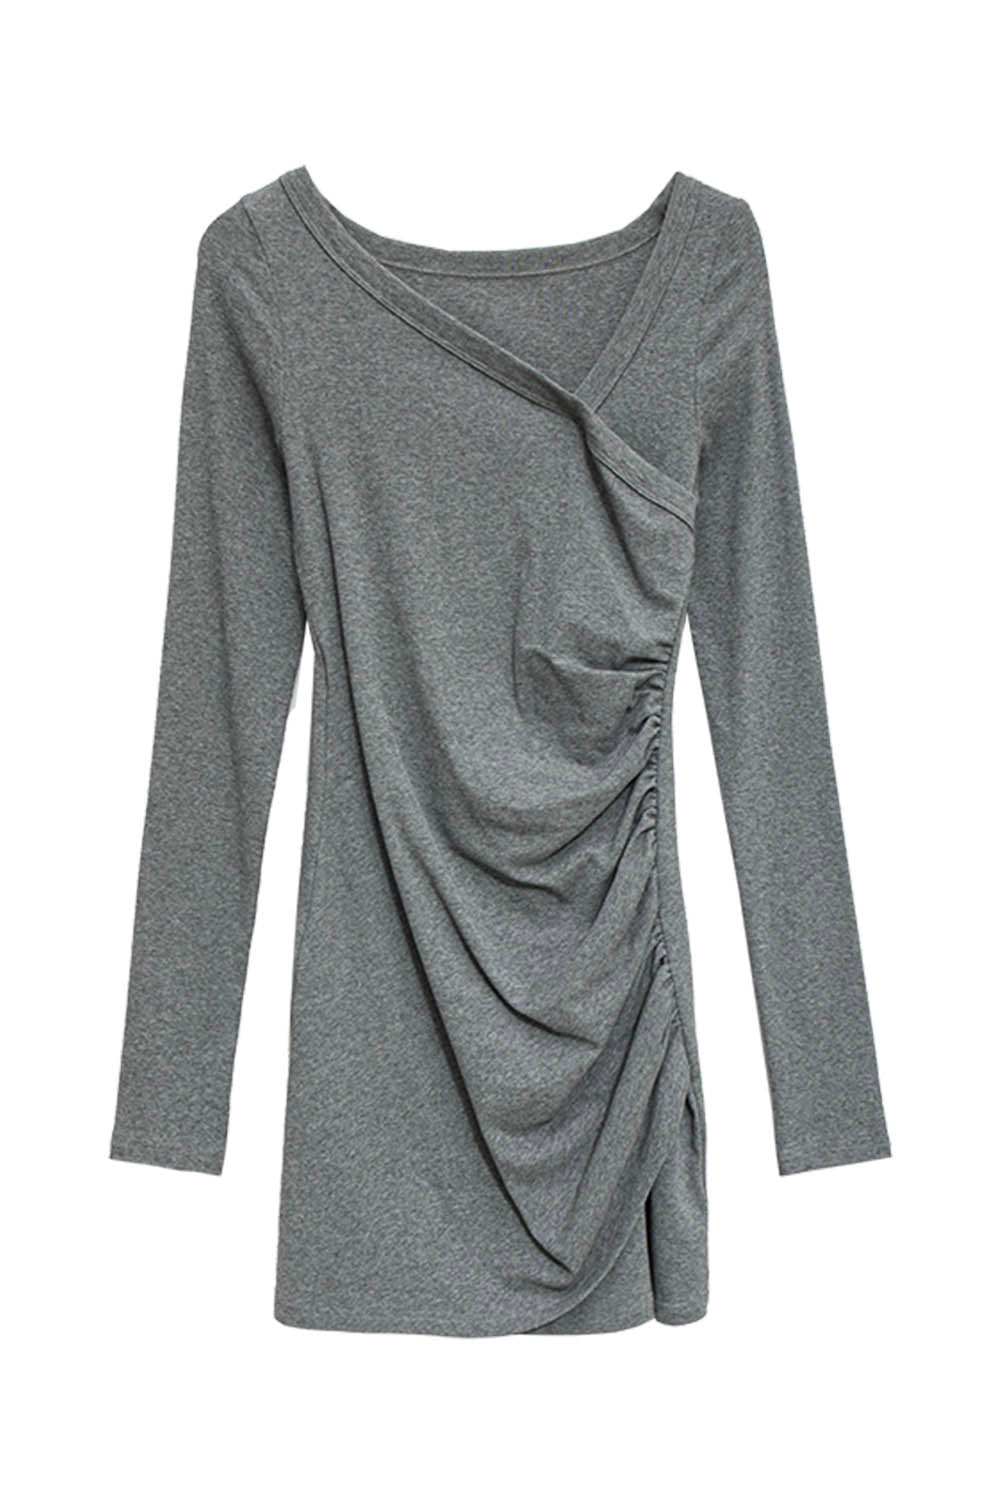 Women's Long Sleeve Dress with Ruched Detail and Asymmetrical Neckline